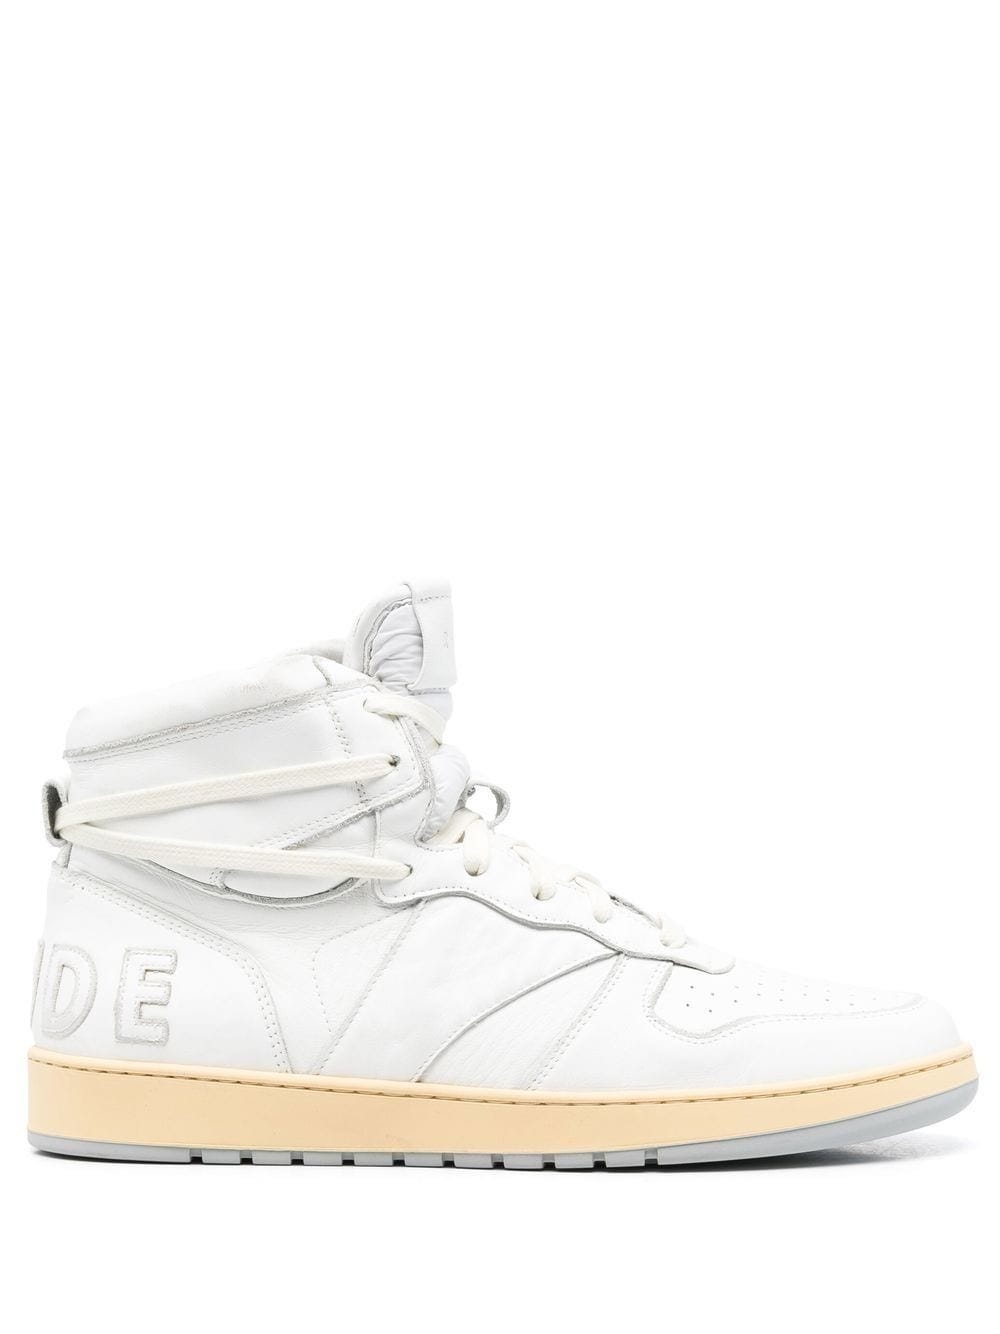 RHUDE WHITE HIGH TOP SNEAKERS WITH APPLIQUÉ